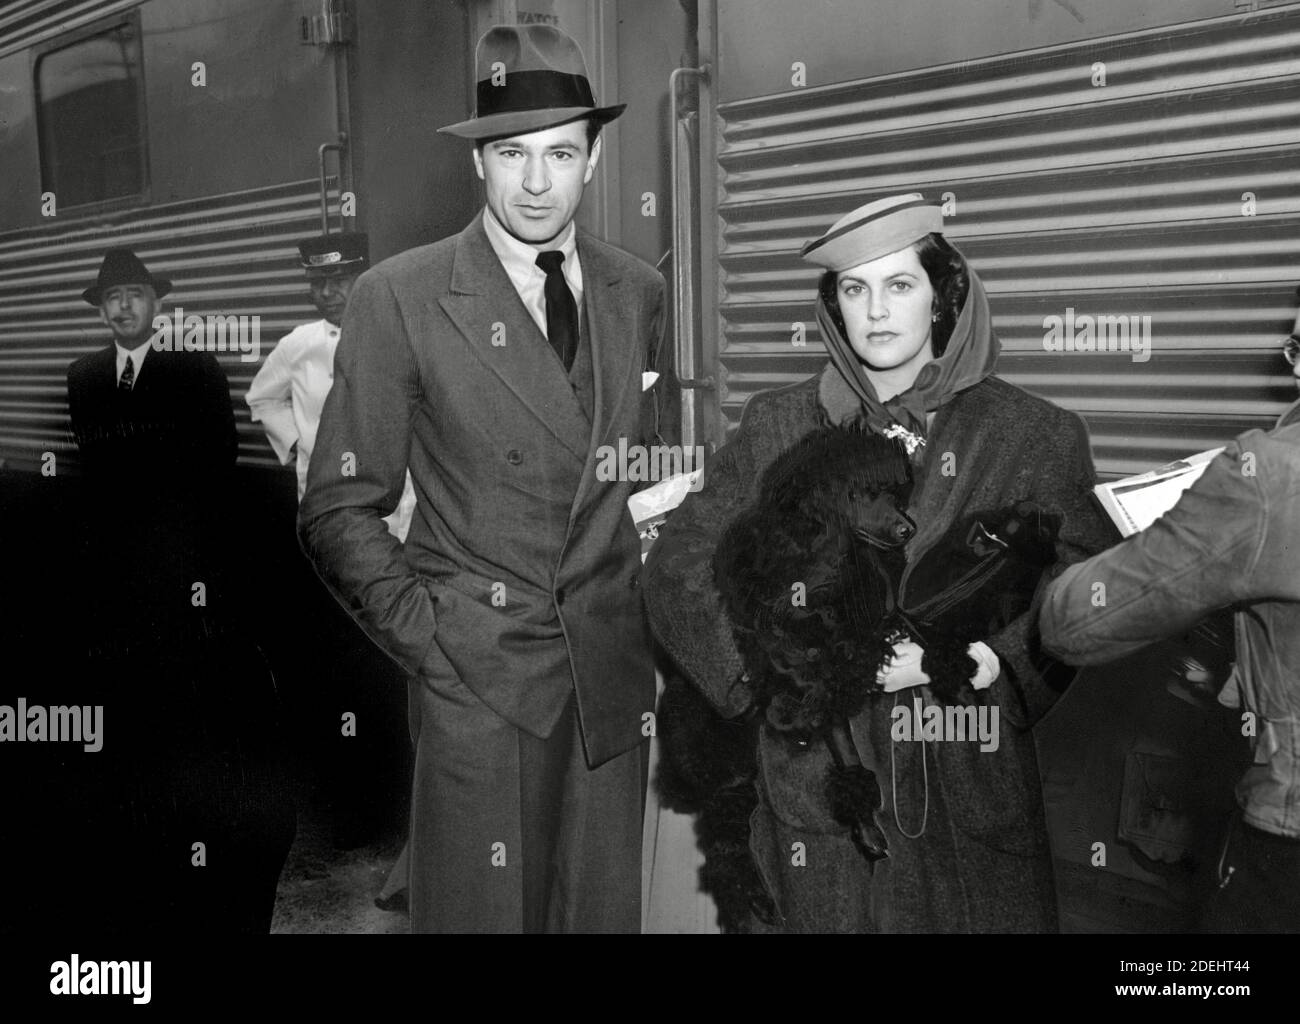 Gary Cooper arriving by train to Los Angeles, CA with his wife Veronica (Balfe) Cooper circa 1938 / File Reference # 34000-856THA Stock Photo